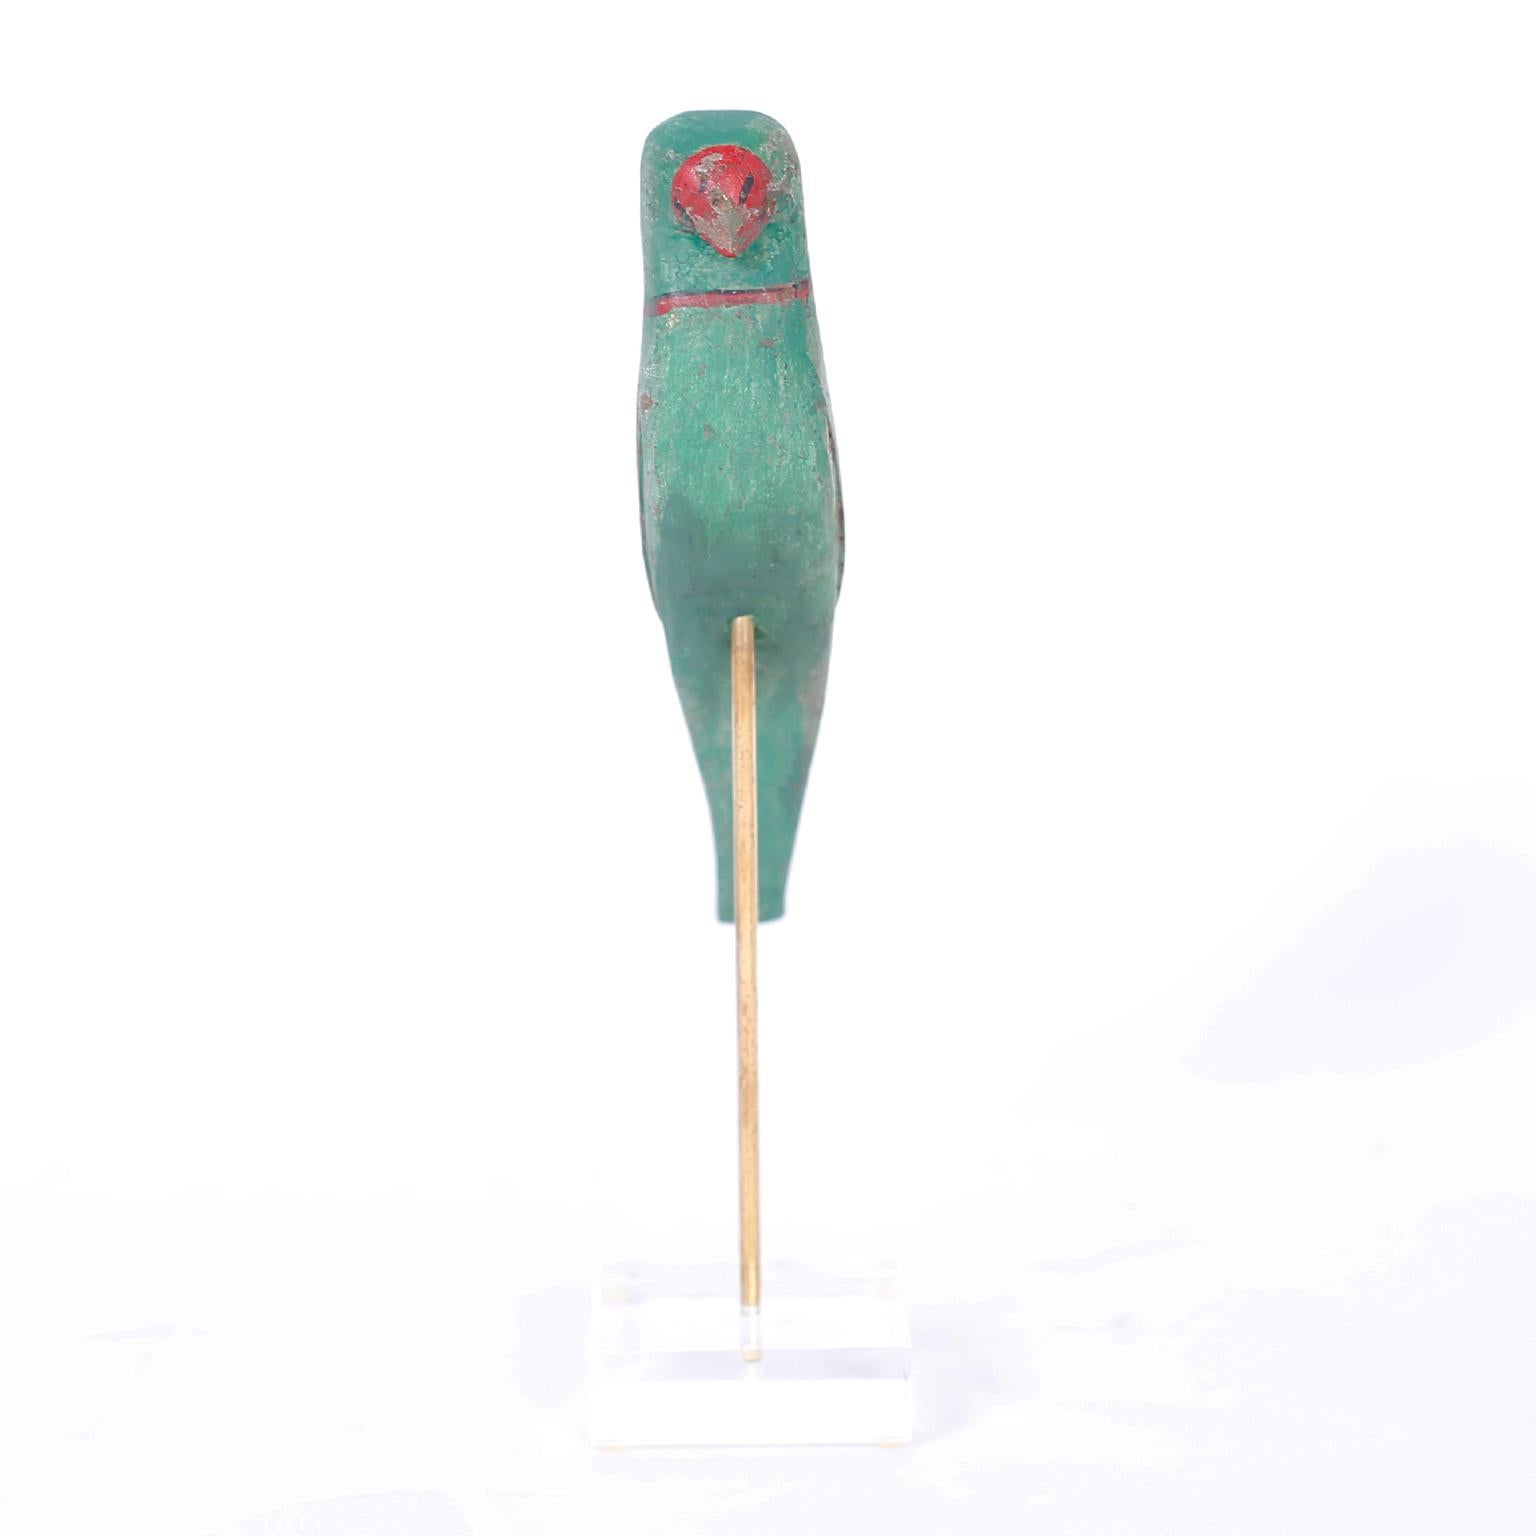 19th century Anglo-Indian bird or parrot carved from indigenous hardwood in a naive style, retaining its original paint now worn to perfection and presented on a brass and lucite stand.